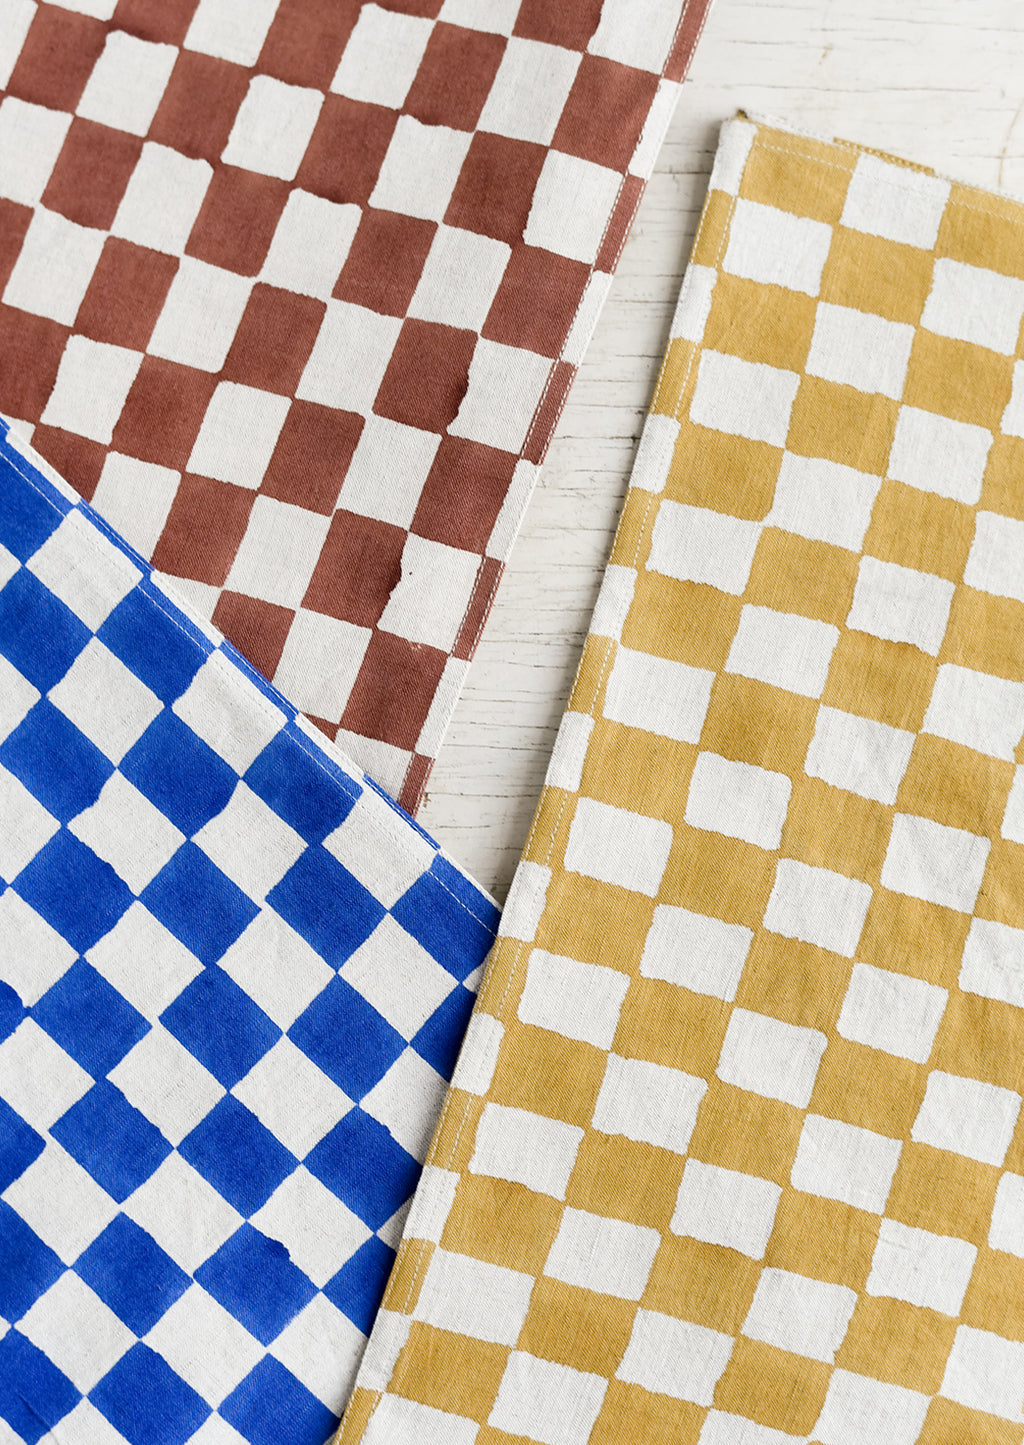 2: Checker patterned table runners in three colors.